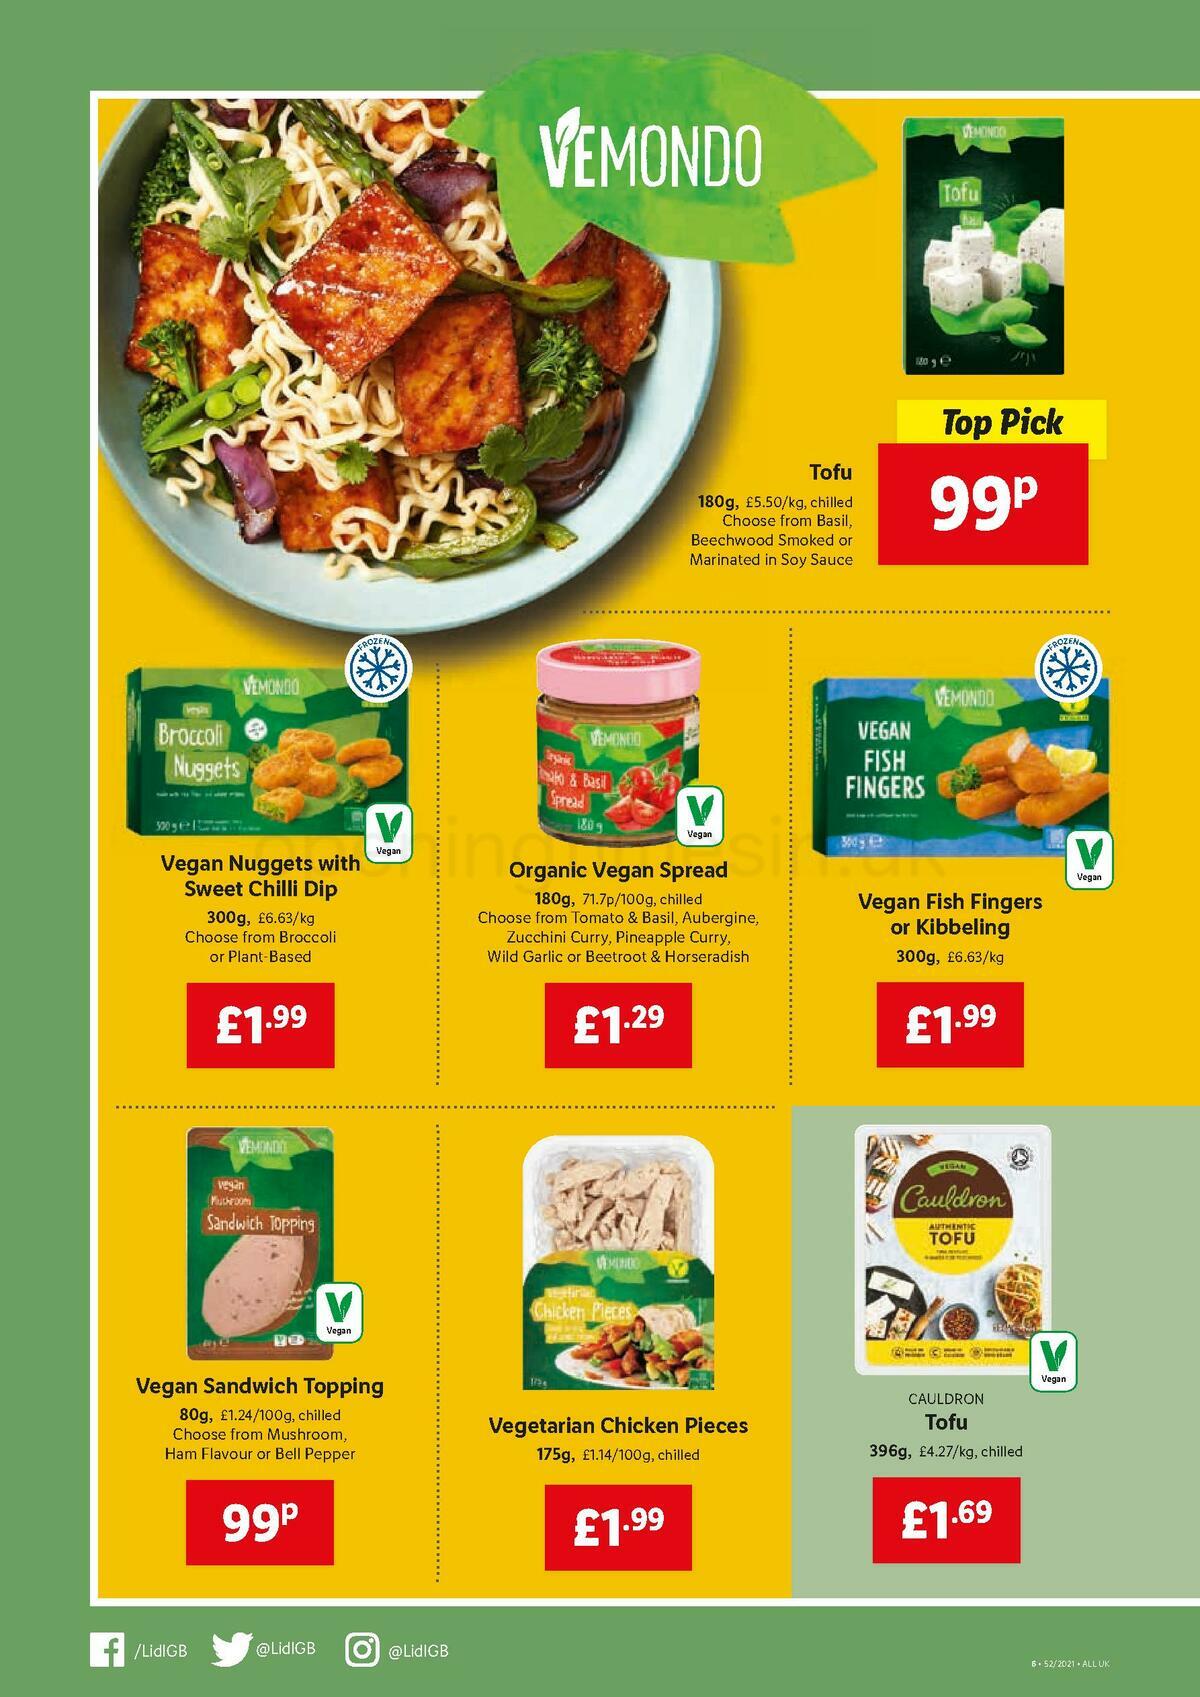 LIDL Offers from 30 December